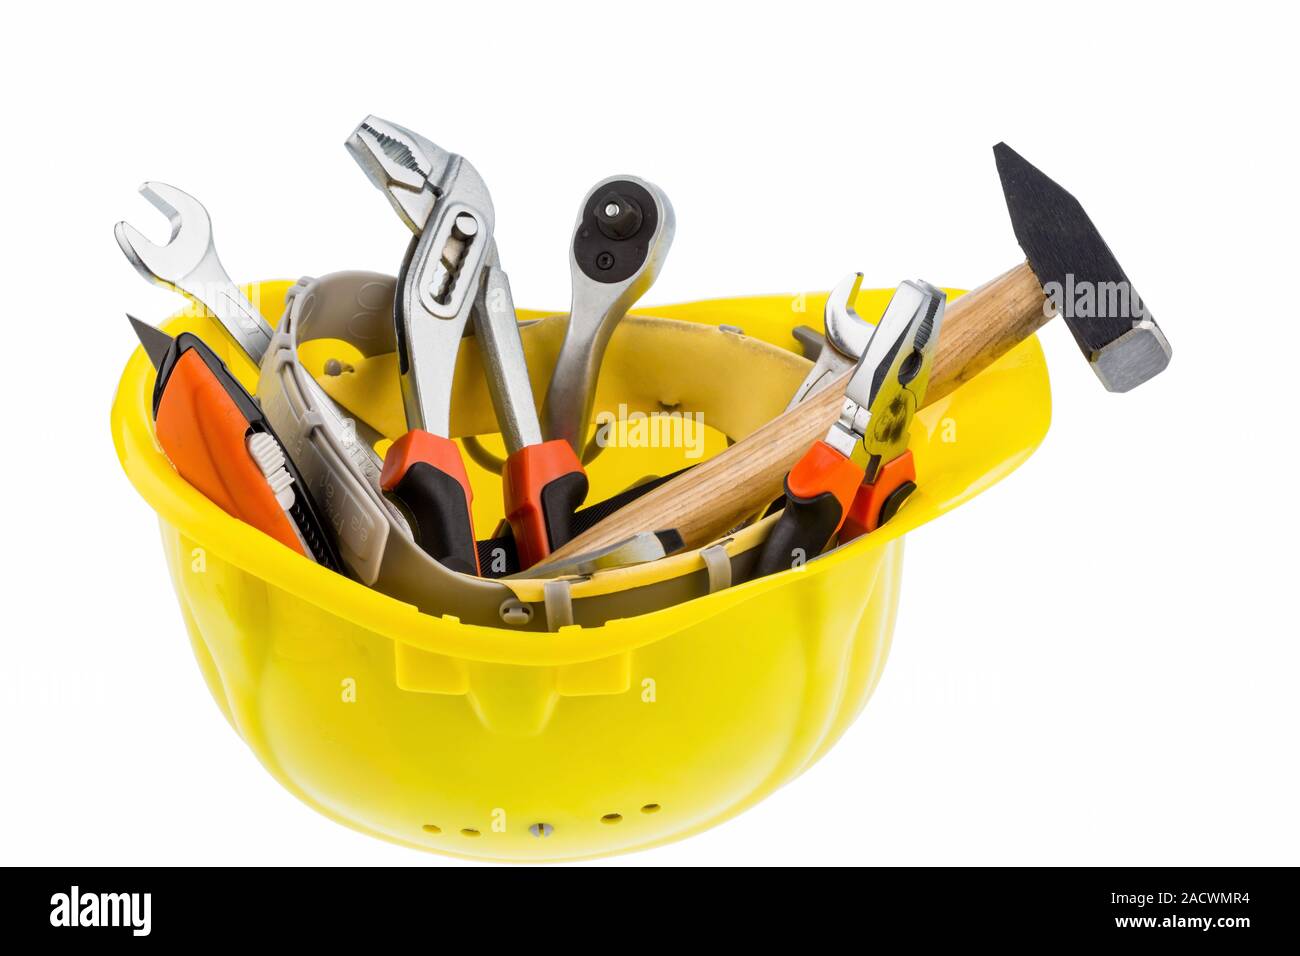 Tool in a safety helmet Stock Photo